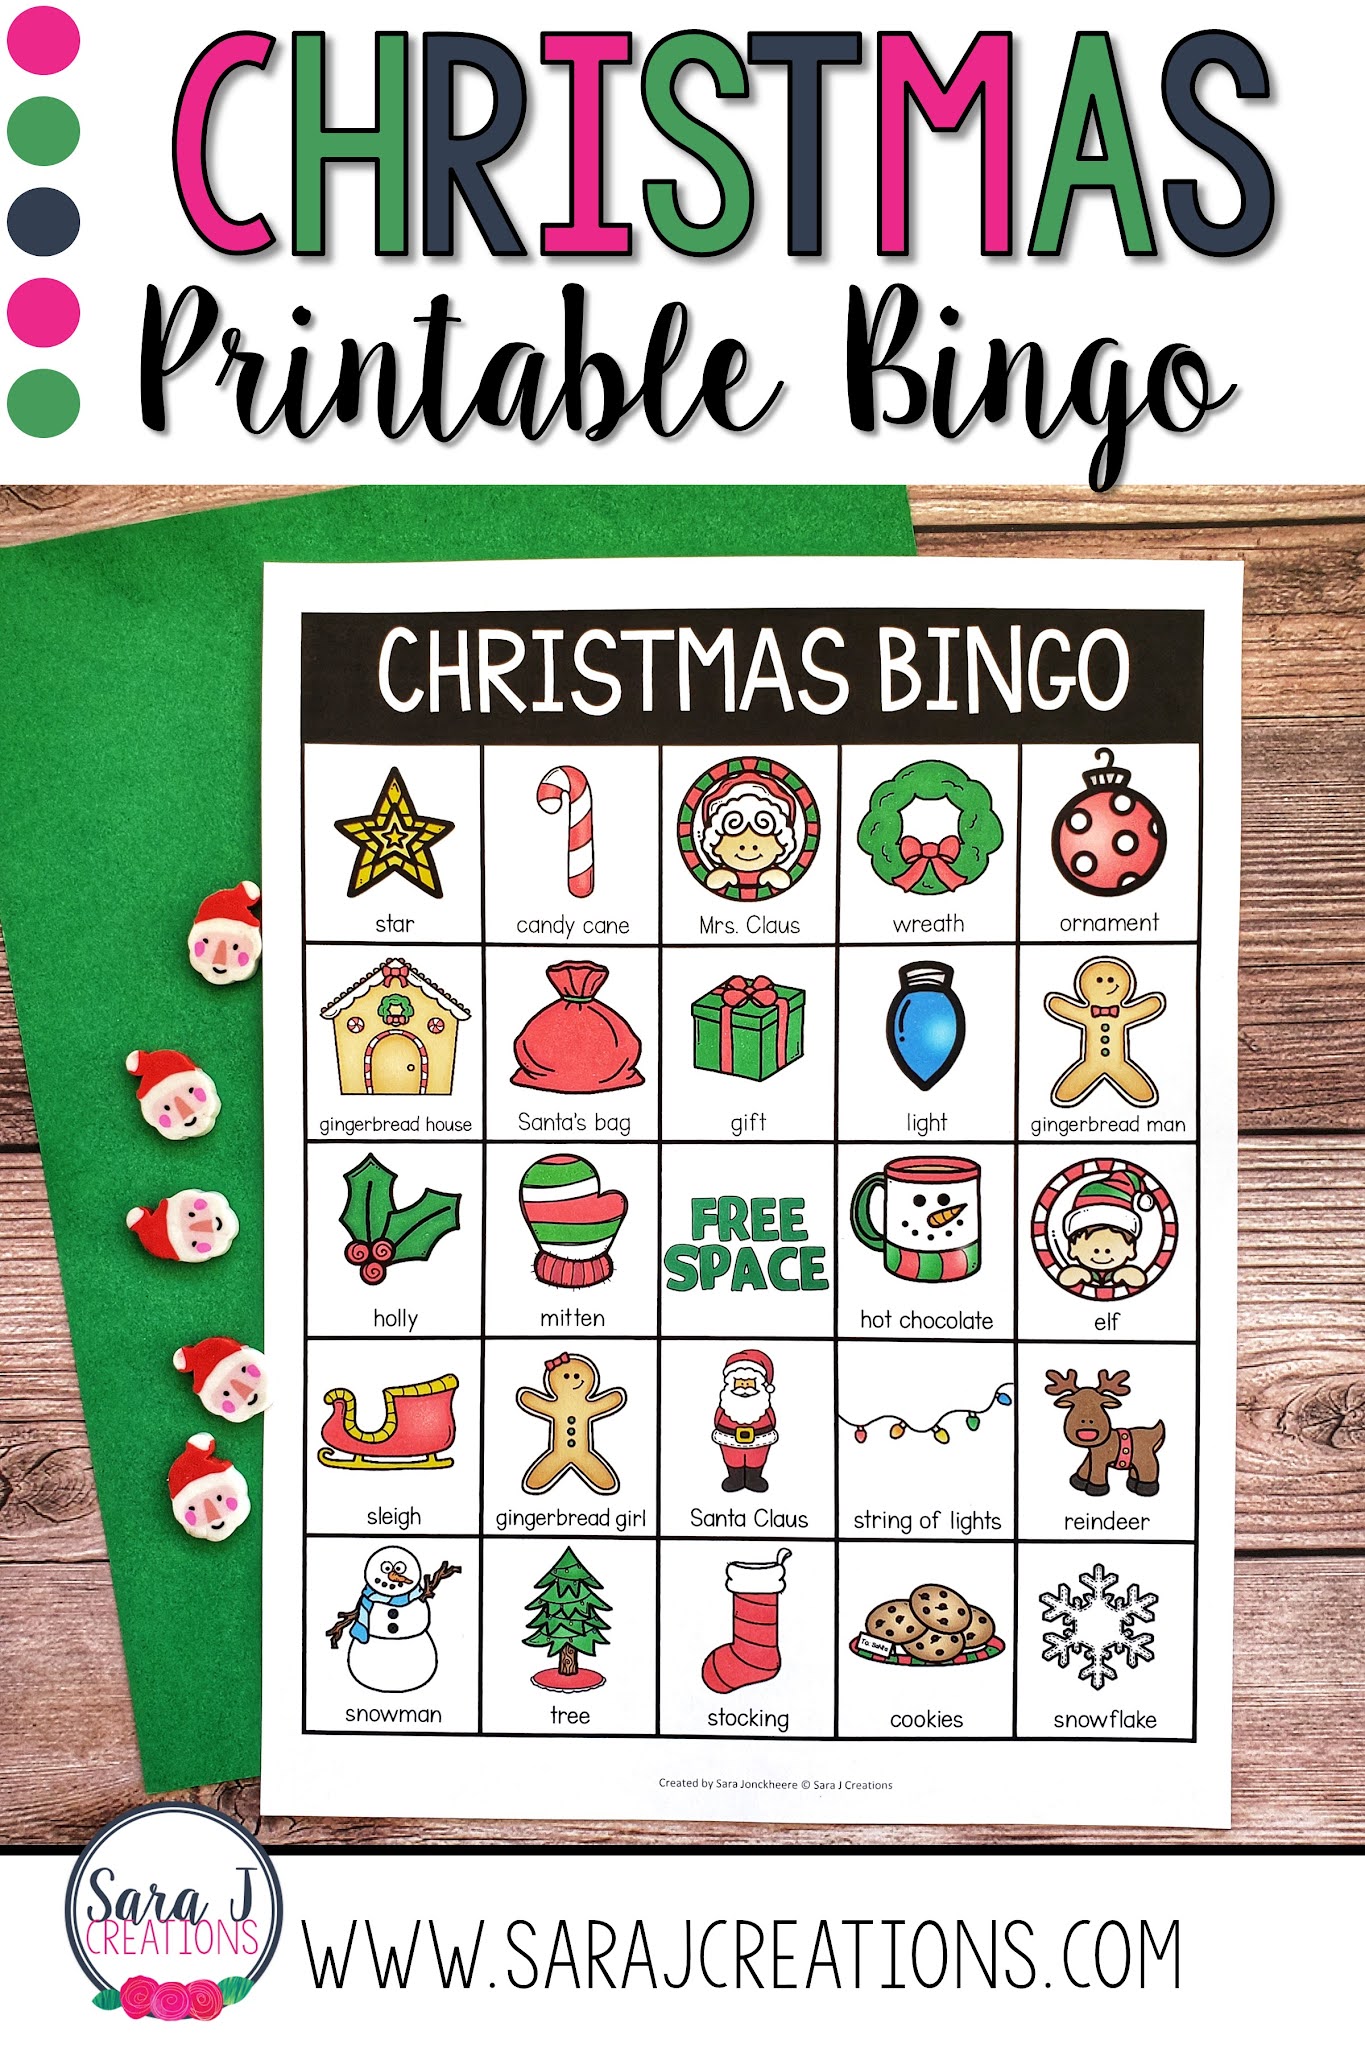 Christmas bingo is the perfect printable fun for a large group. With 30 different game boards in black and white and color, you can easily print and play with a large group. This is great for kids during a holiday party.